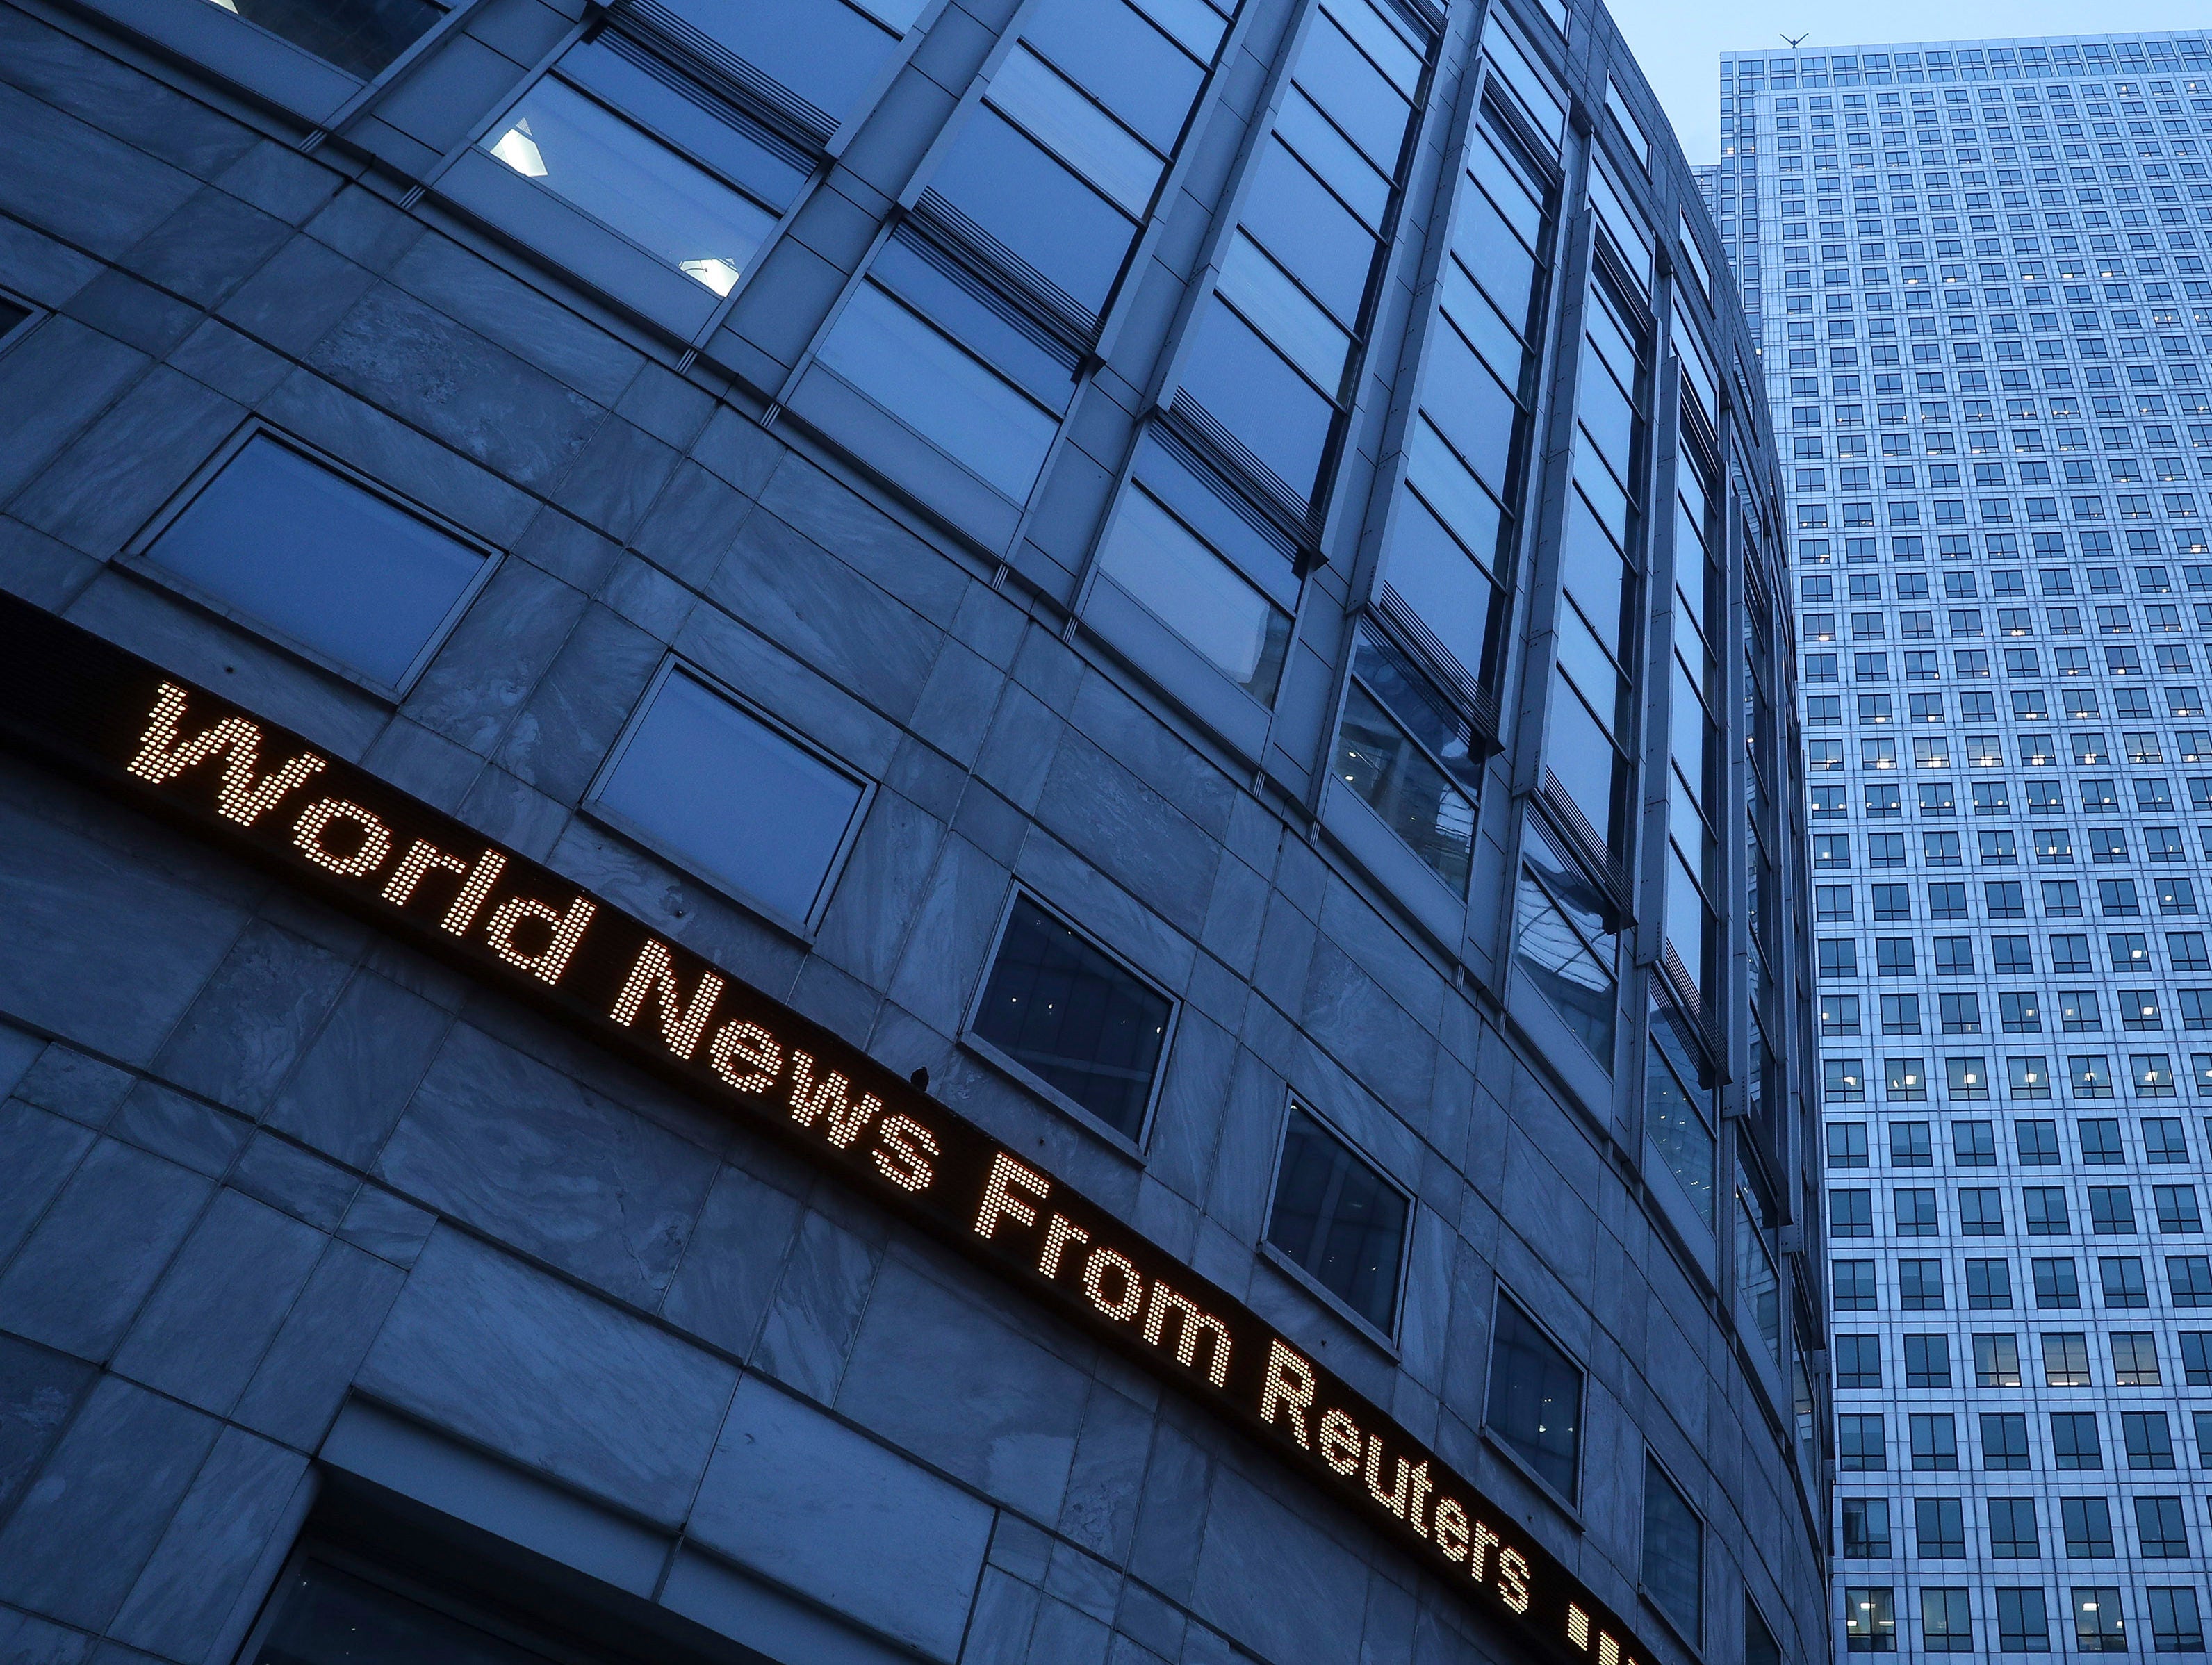 Journalist jobs to go at Reuters news agency in global review of newsrooms